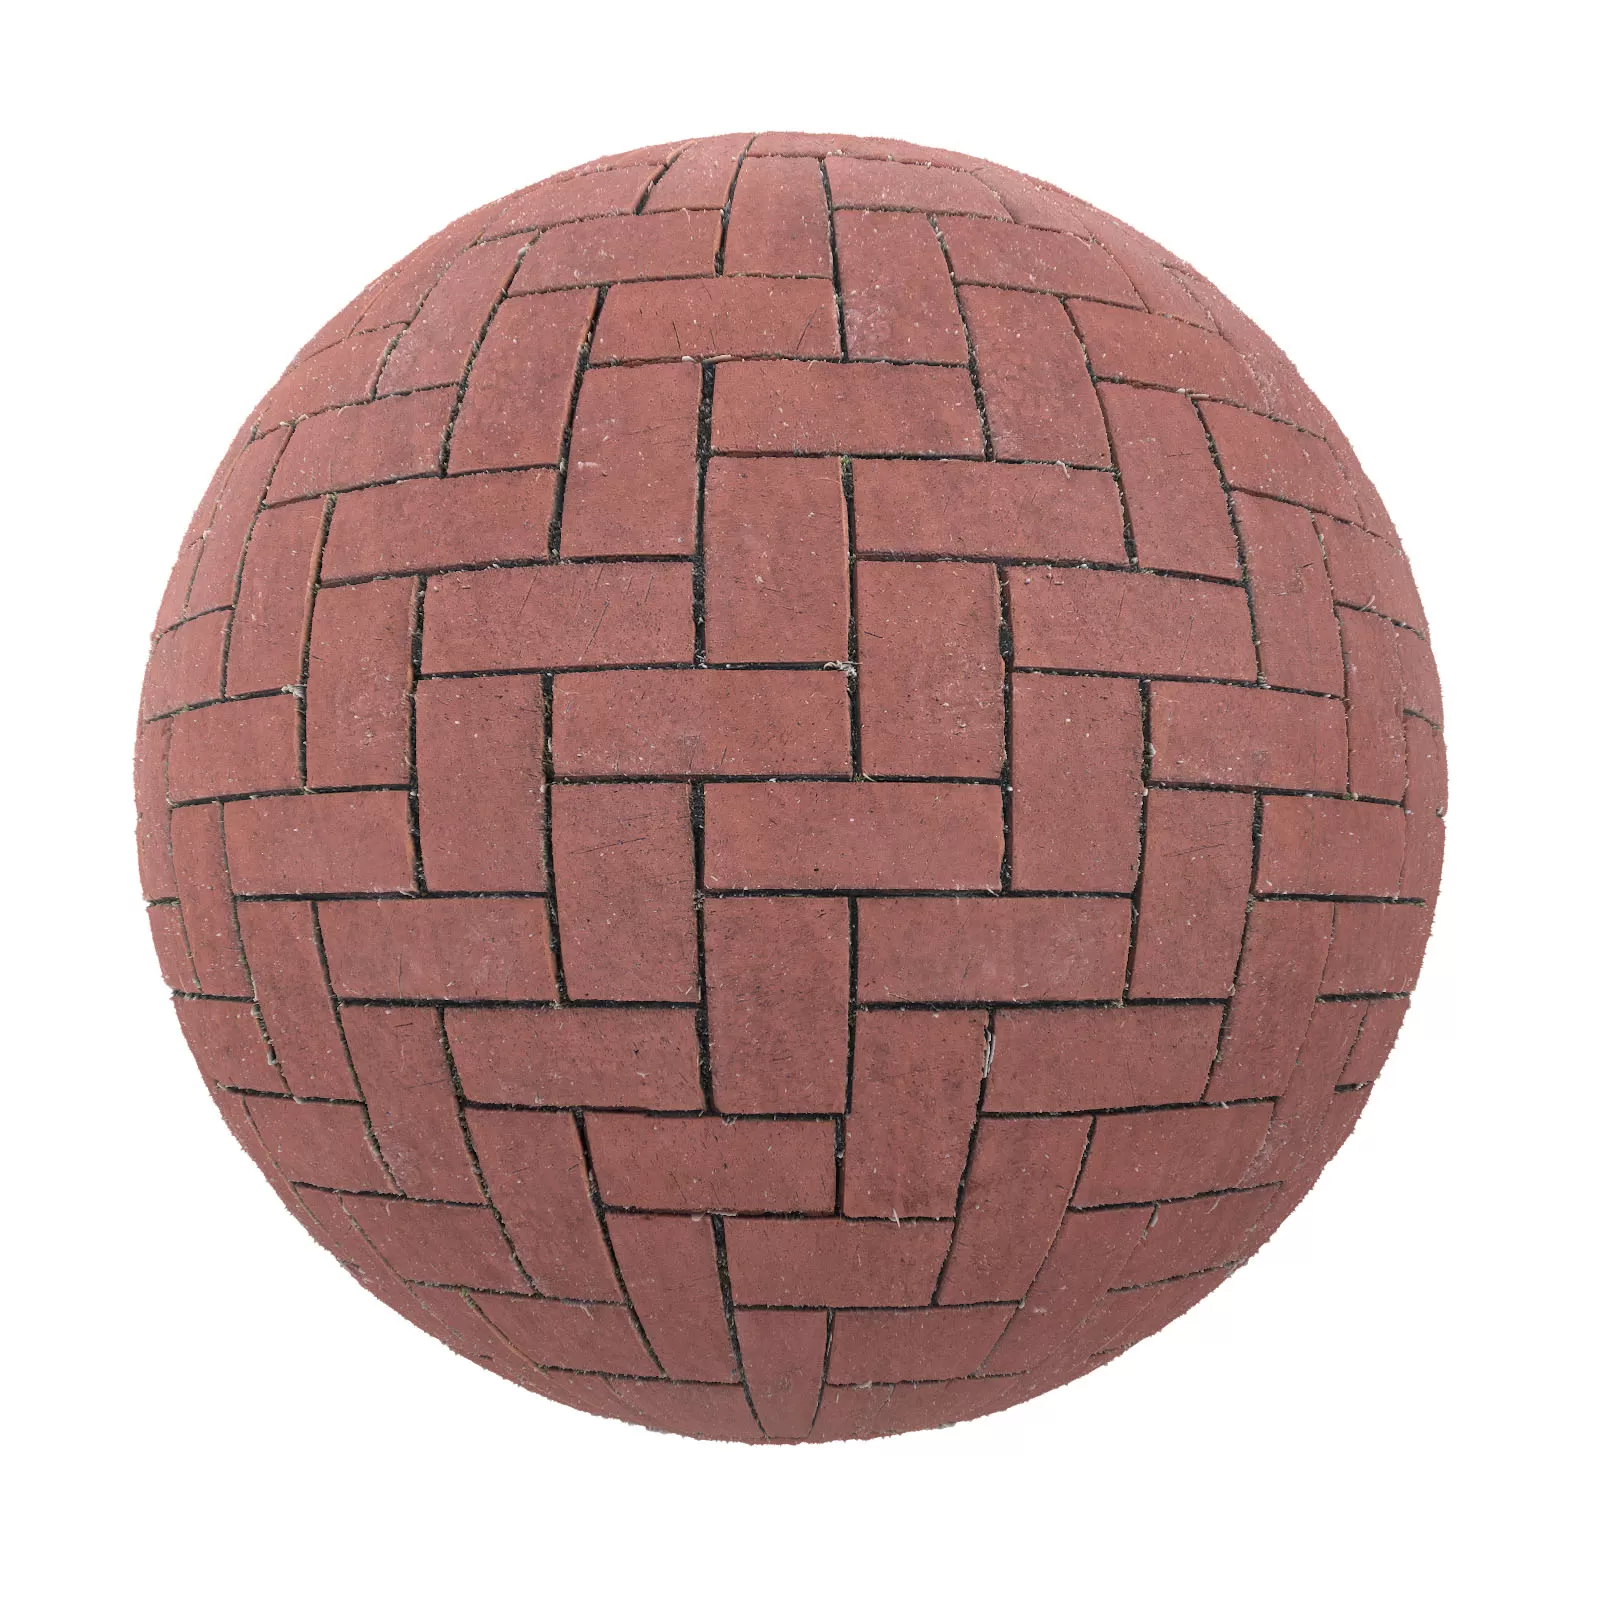 PBR CGAXIS TEXTURES – PAVEMENTS – Red Brick Pavement 7